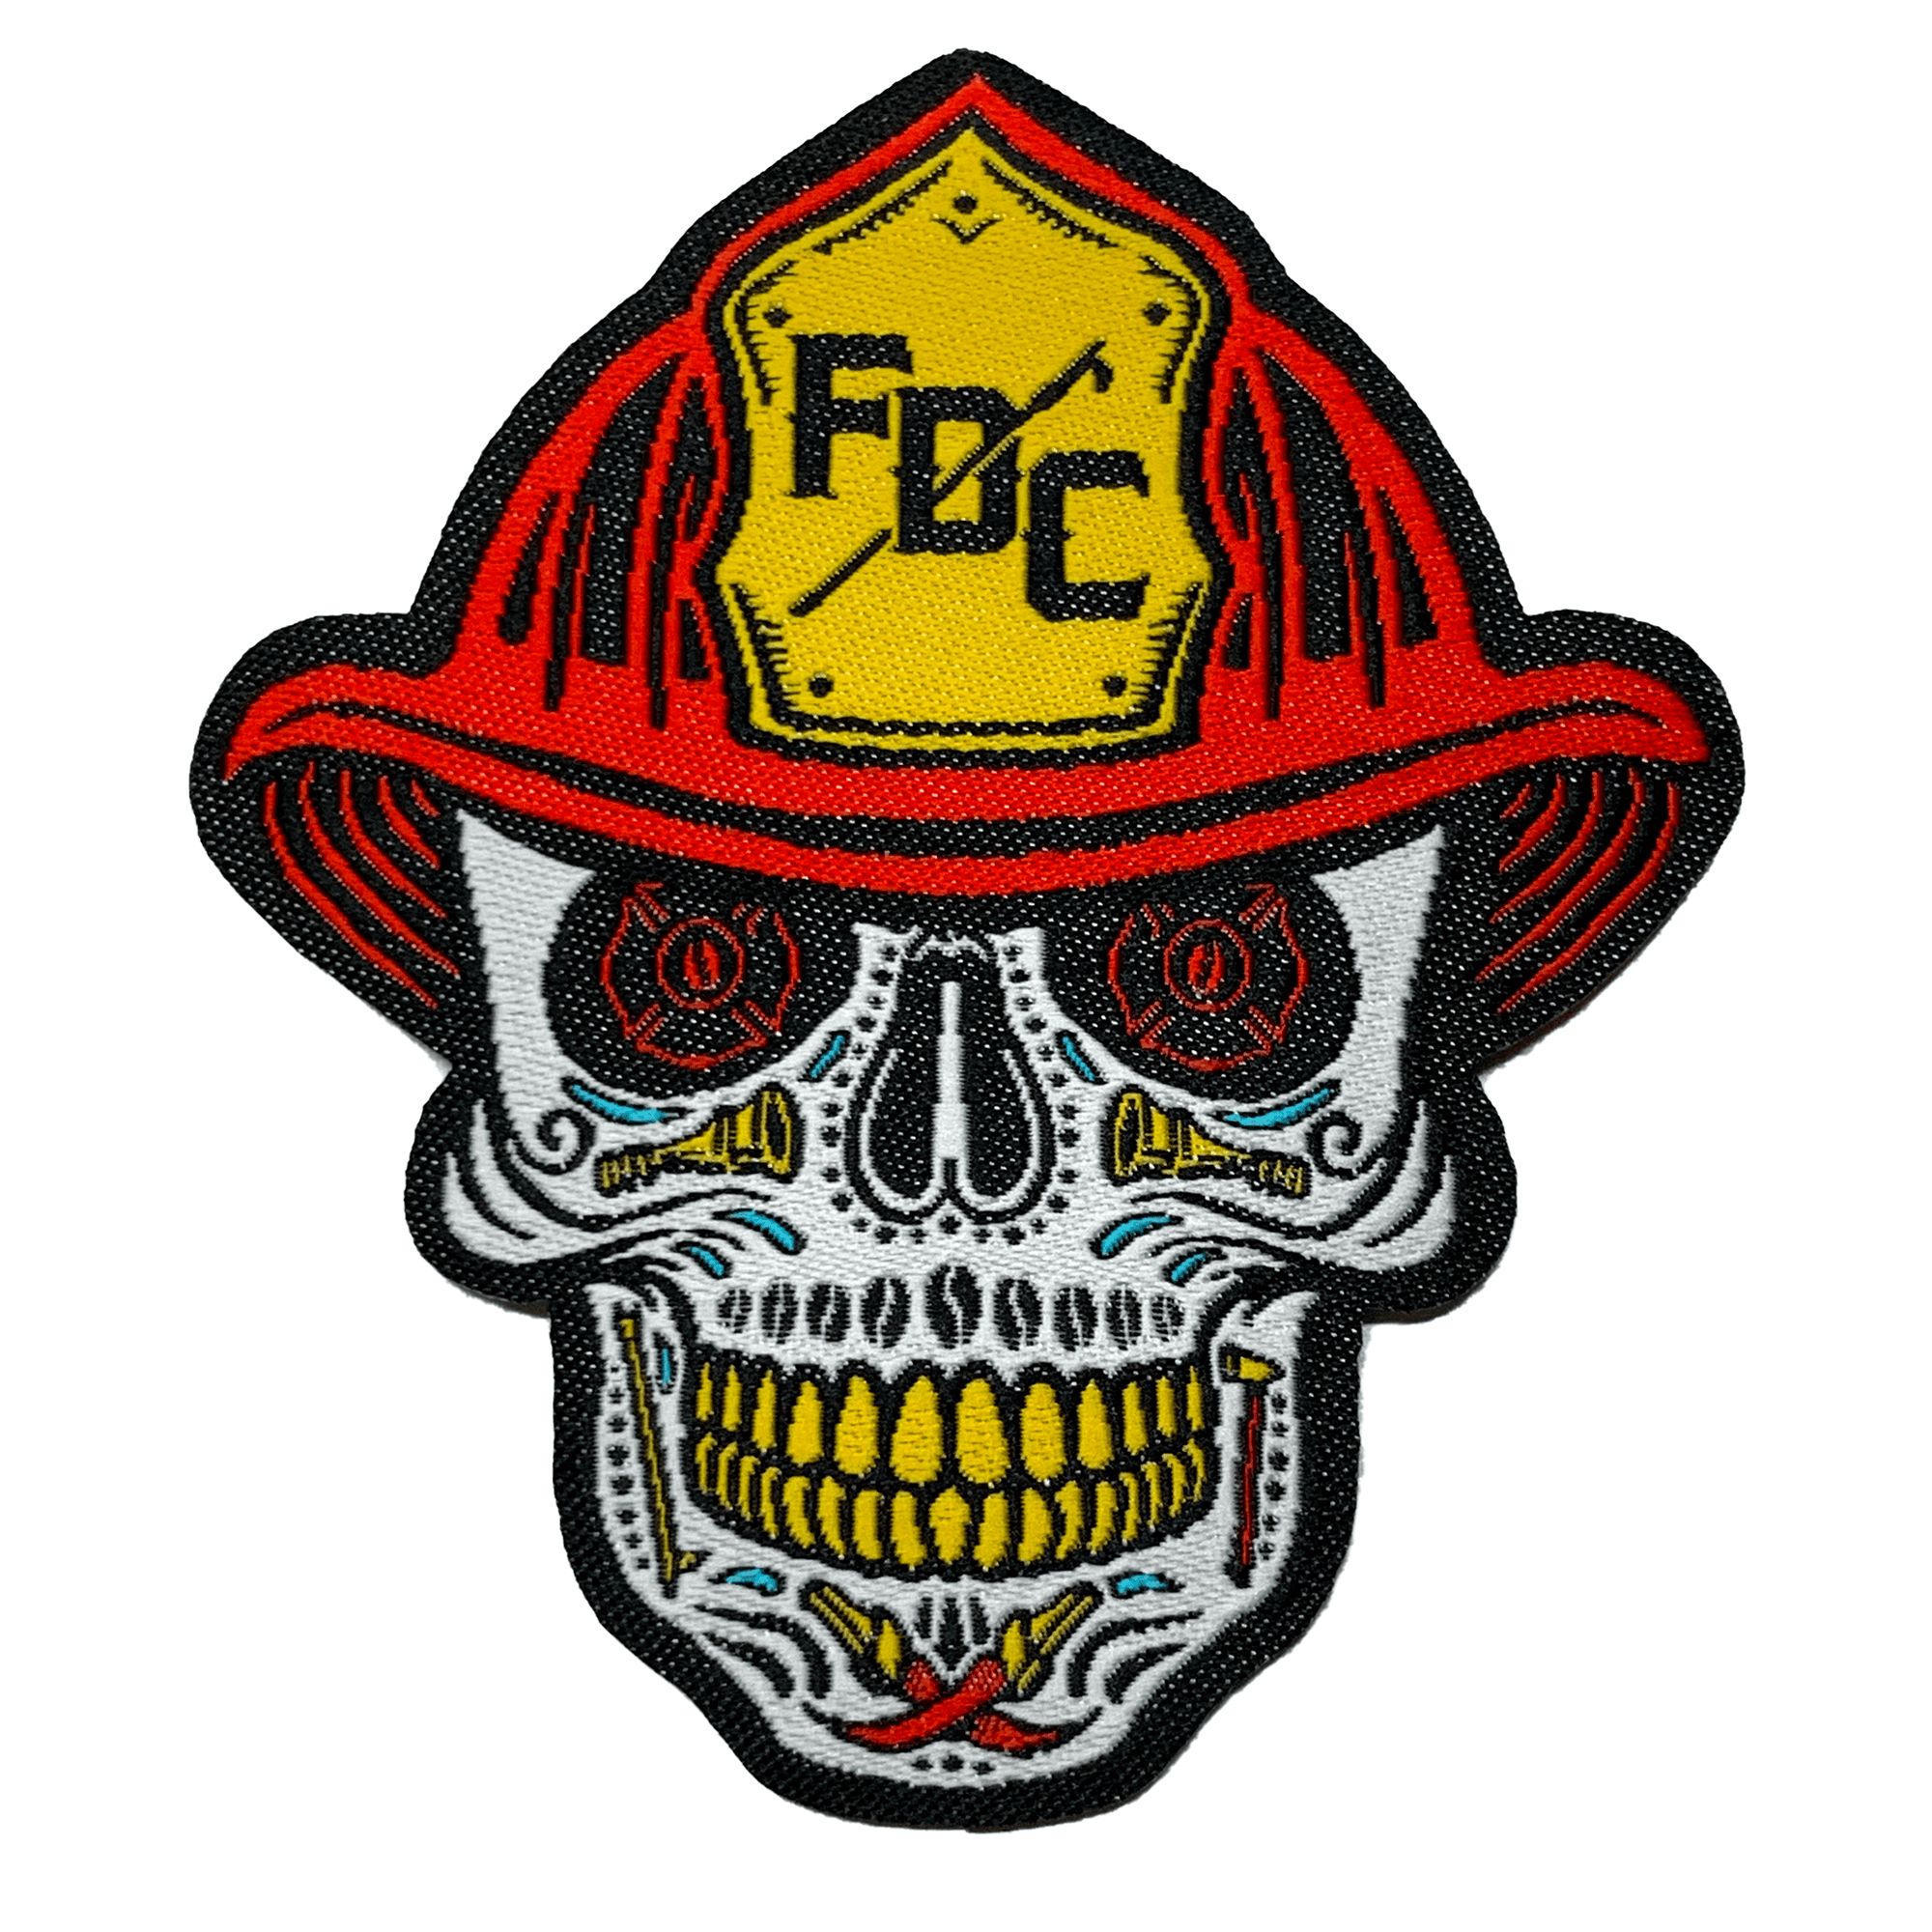 The Dead Before Coffee Logo, a skill wearing a fireman's helmet, on a patch